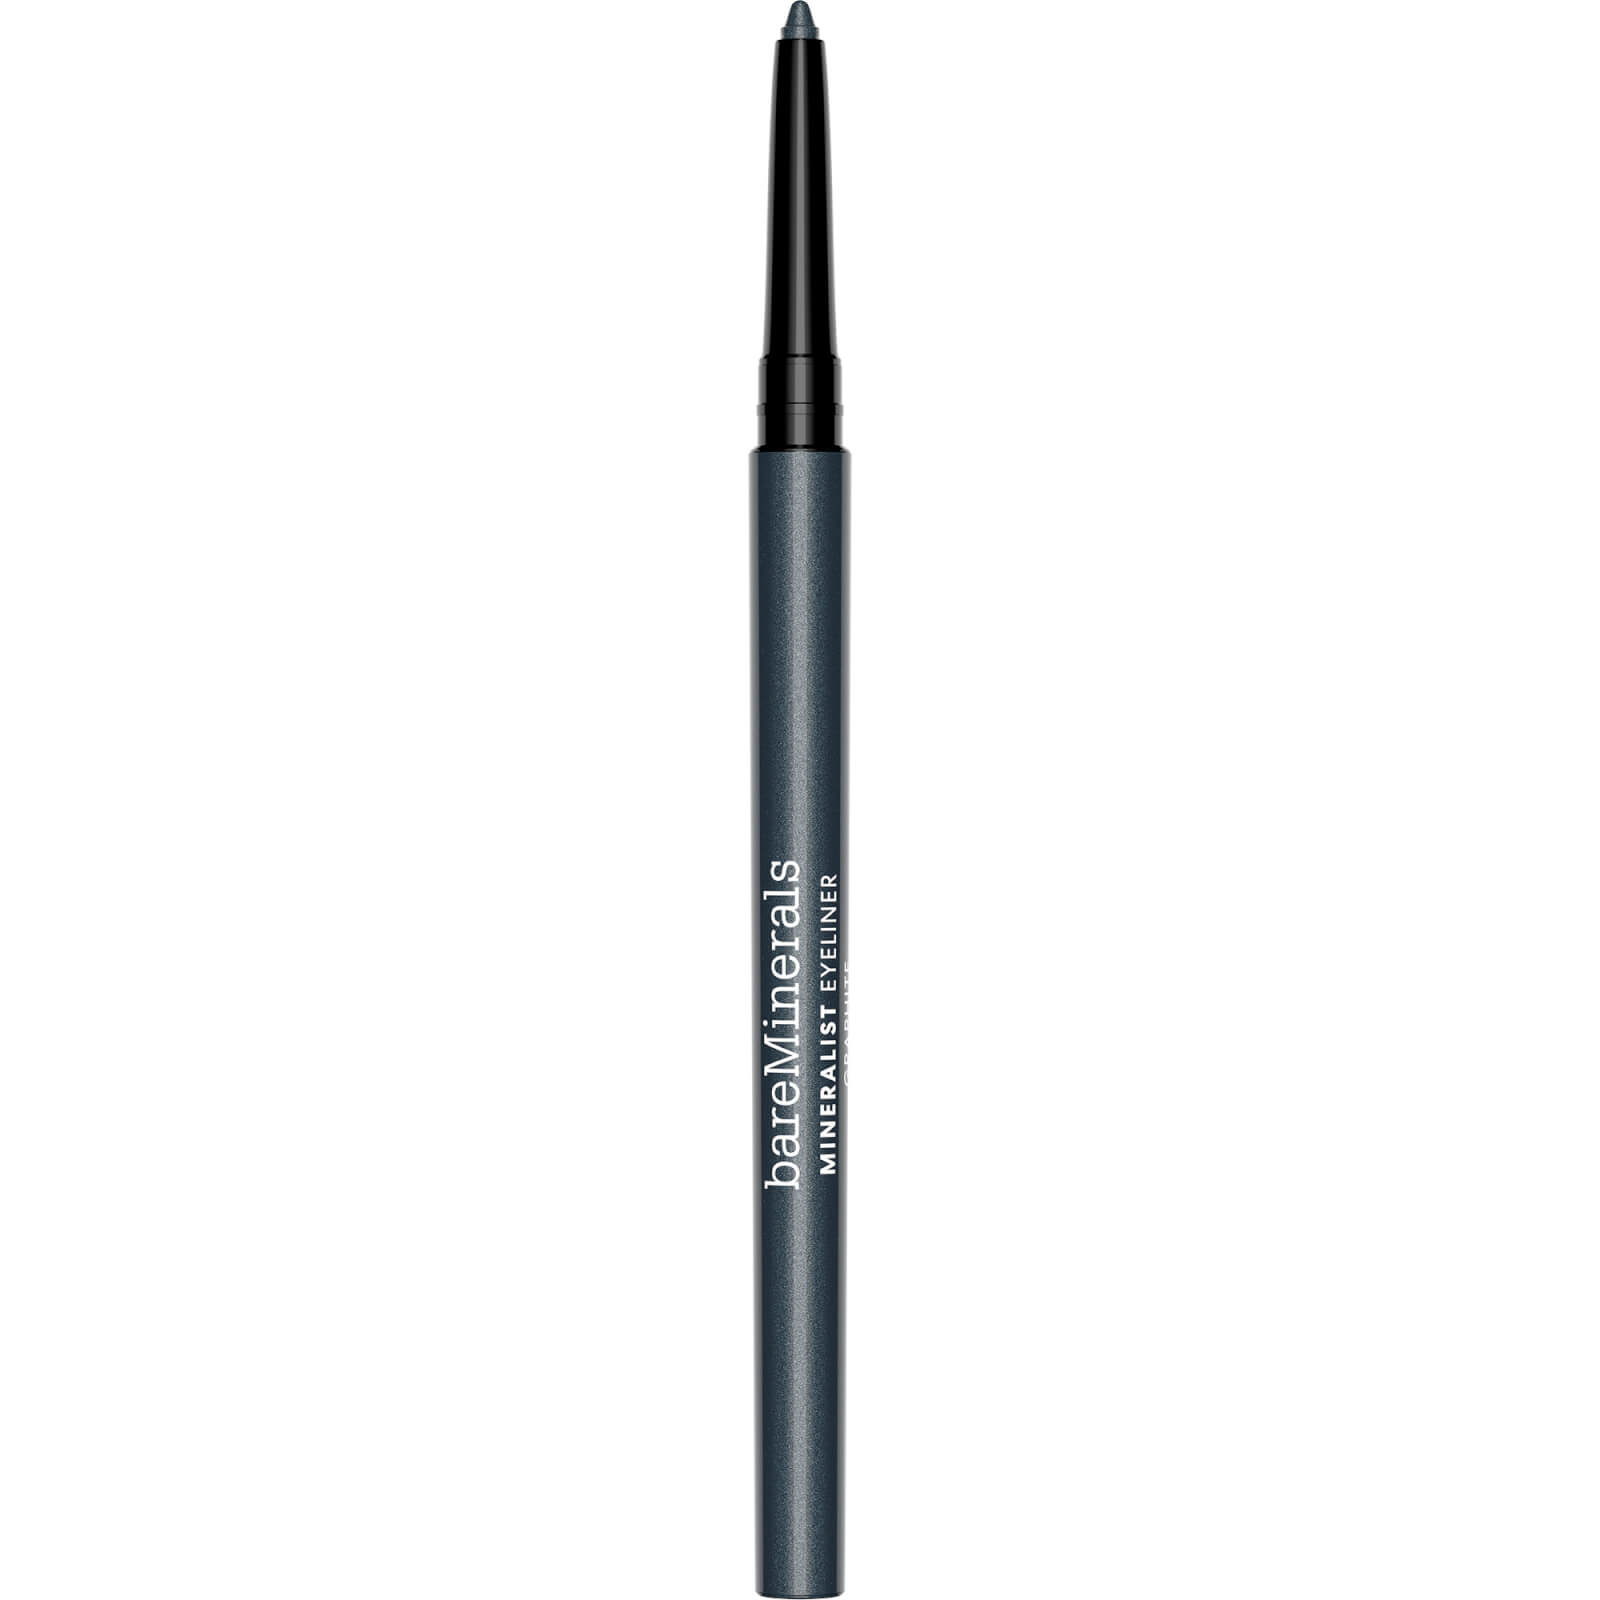 Image of bareMinerals Mineralist Eyeliner 0.35g (Various Colours) - Graphite